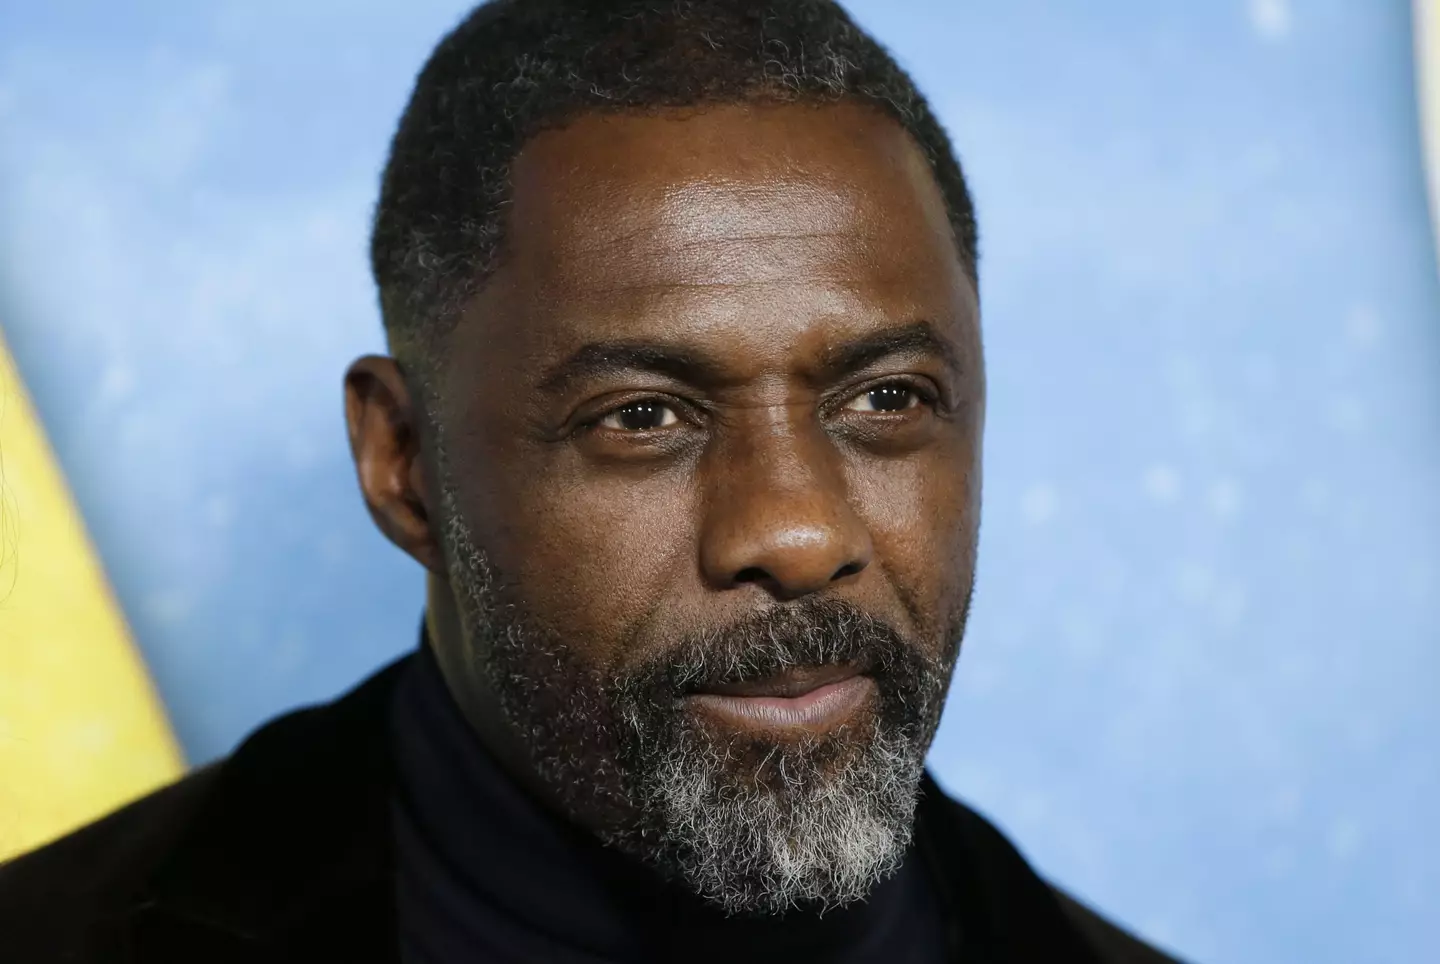 Idris Elba is one of the bookies favourites to become the next James Bond.